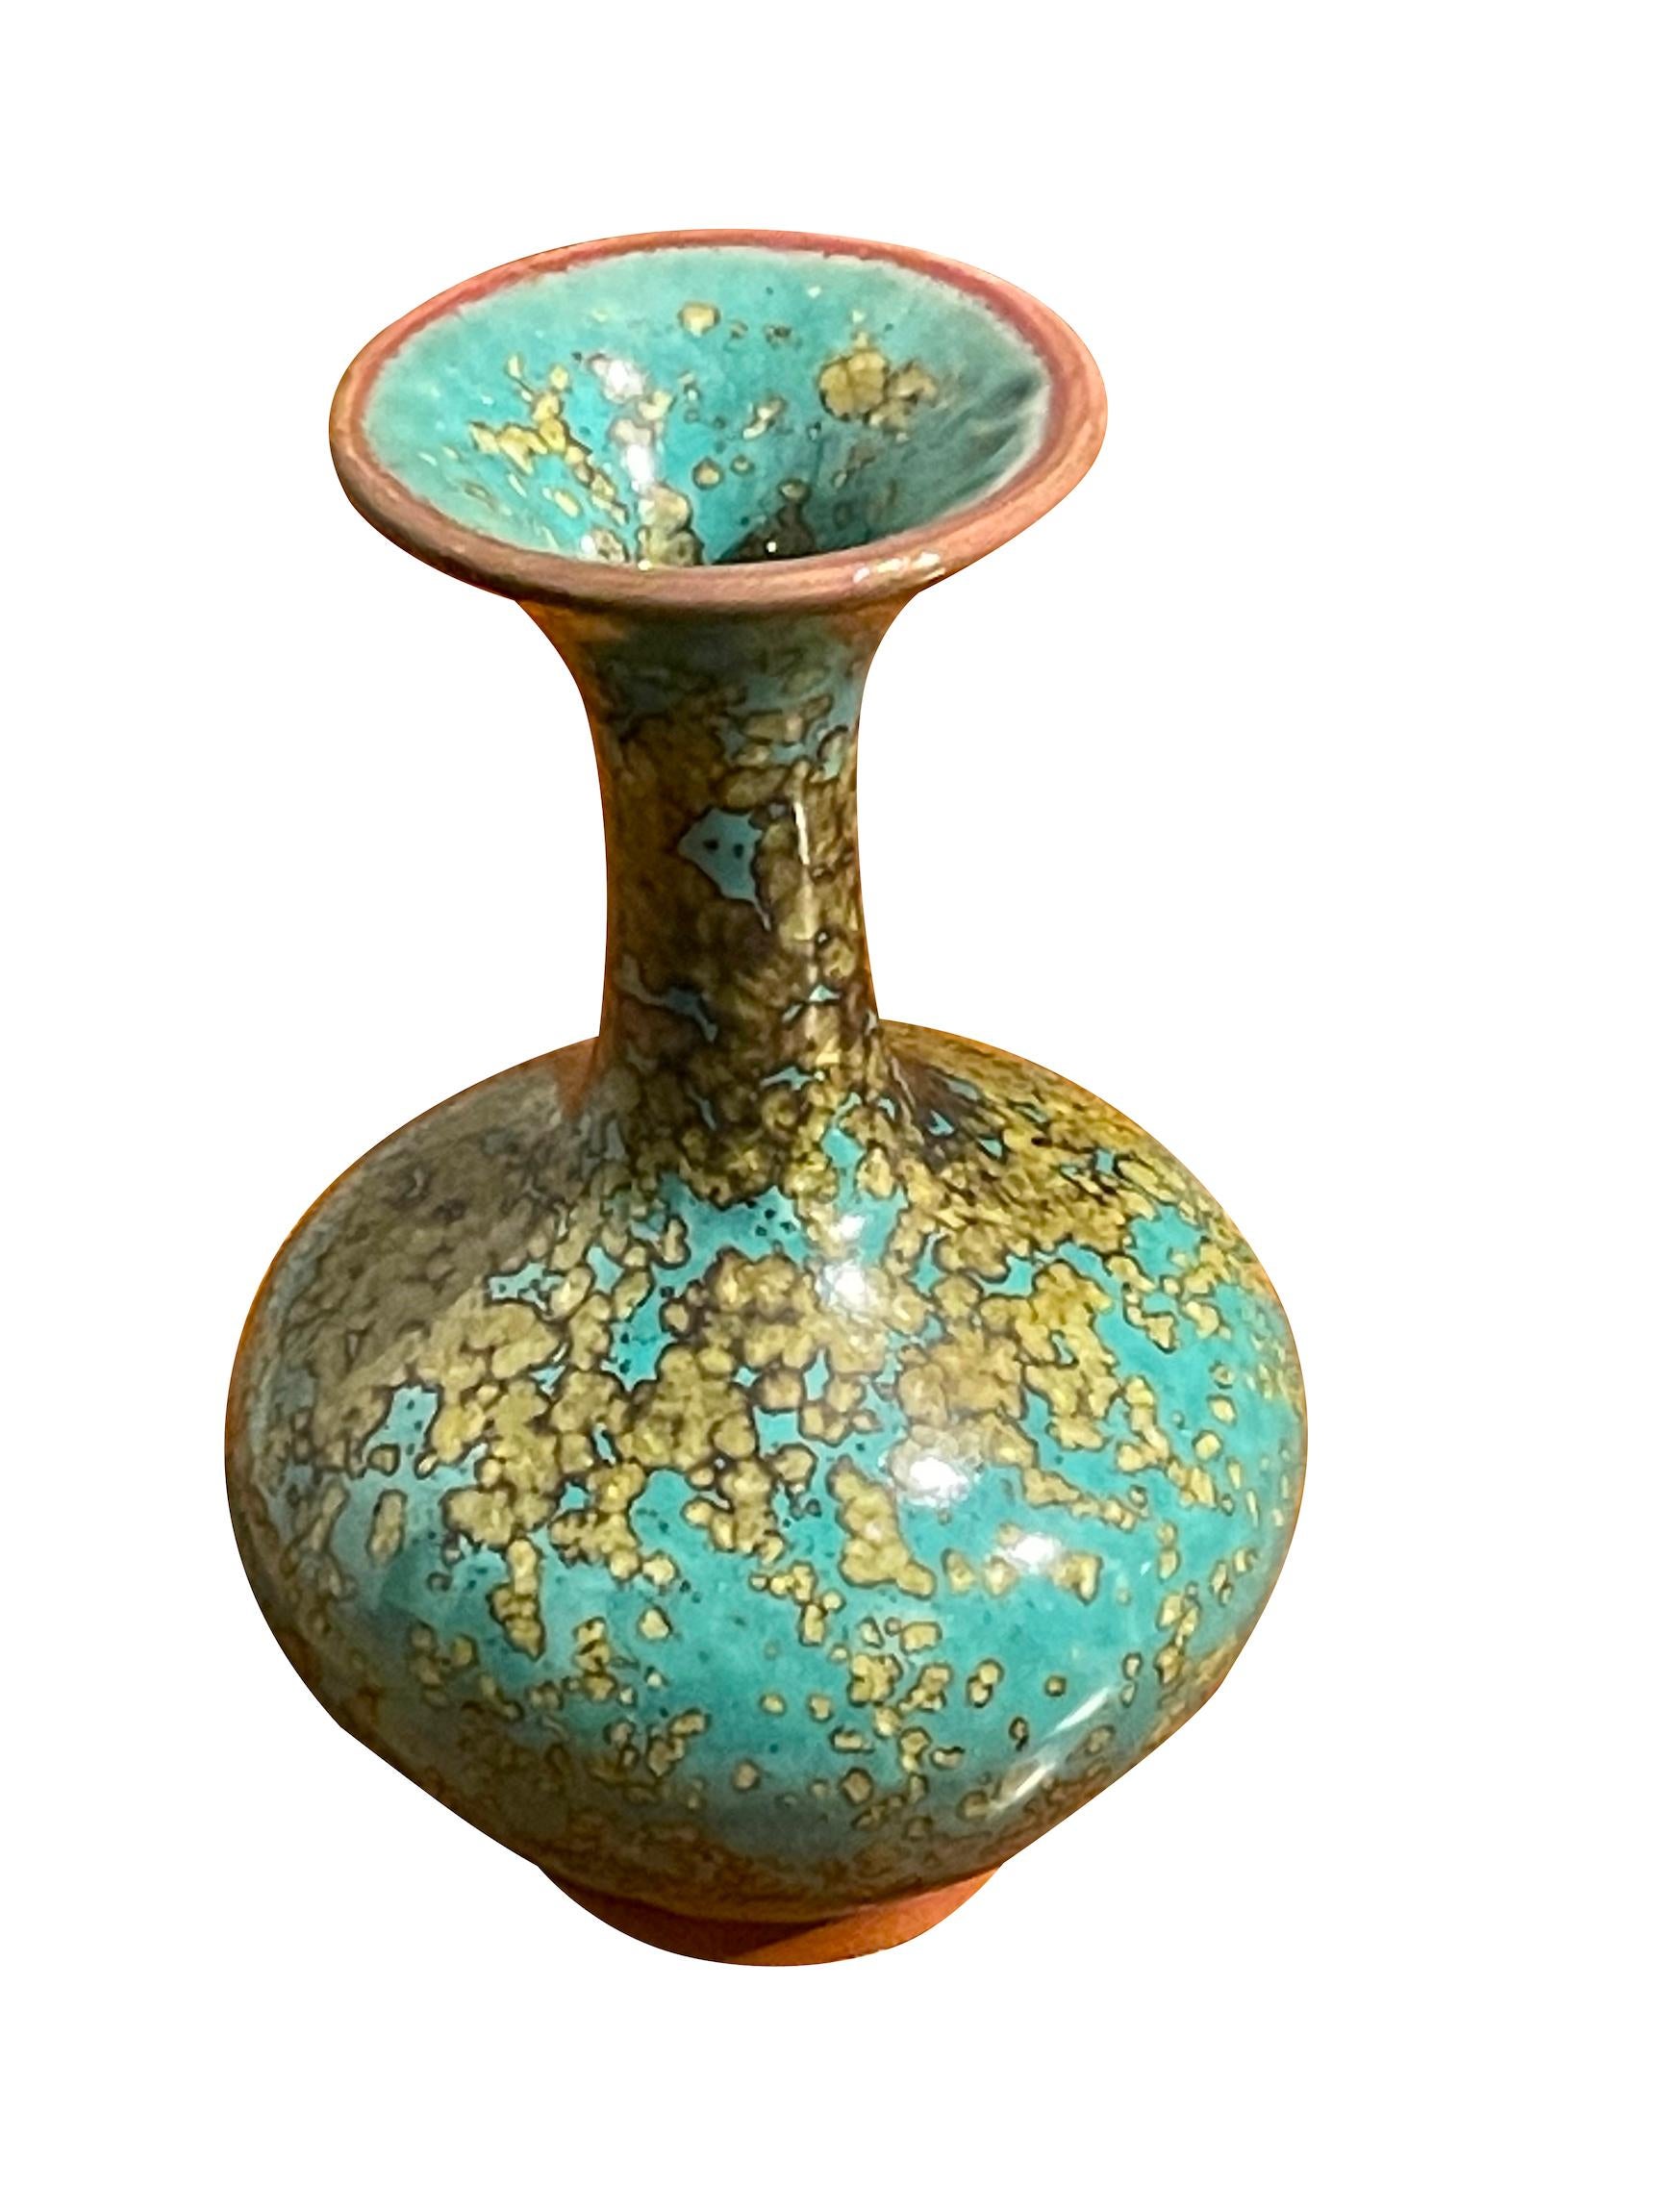 Contemporary Chinese turquoise with gold speckled glaze vase.
Classic shape with wide spout opening.
One of several pieces from a large collection.